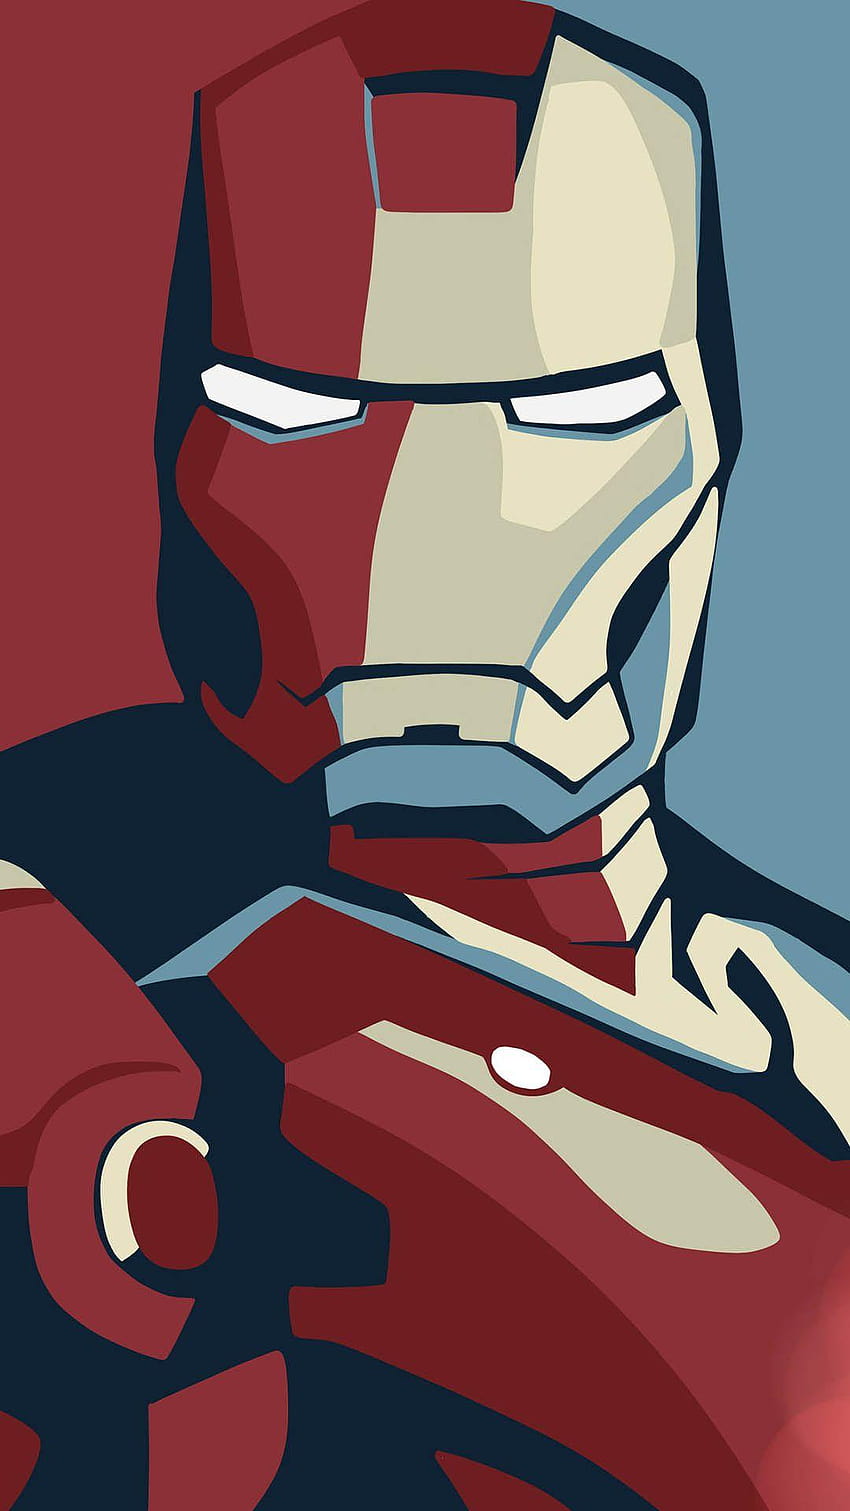 Cool iron man fond d'écran iphone mobile android, iron man for mobile HD phone  wallpaper | Pxfuel